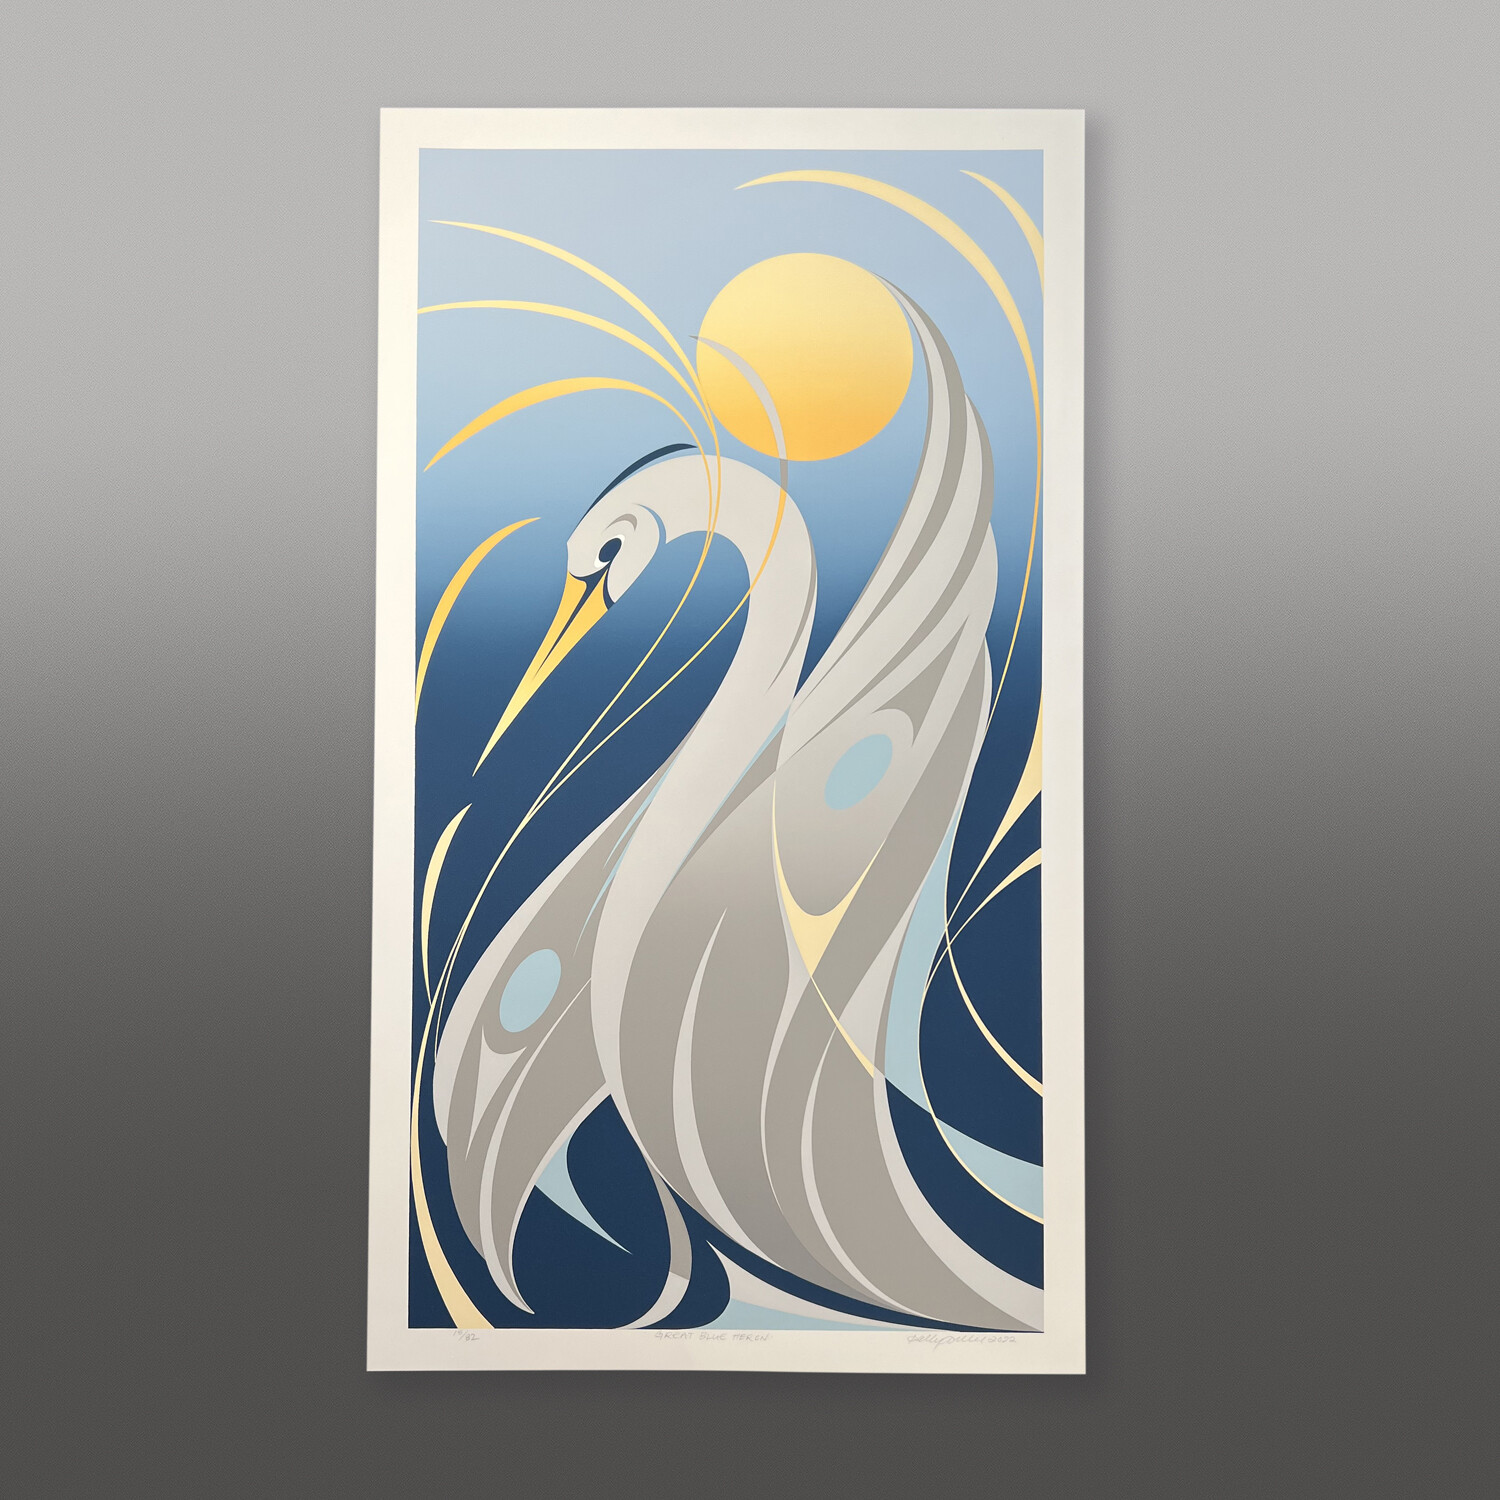 Great Blue Heron
Kelly Cannell
Coast Salish
Serigraph
30" x 16"
$500